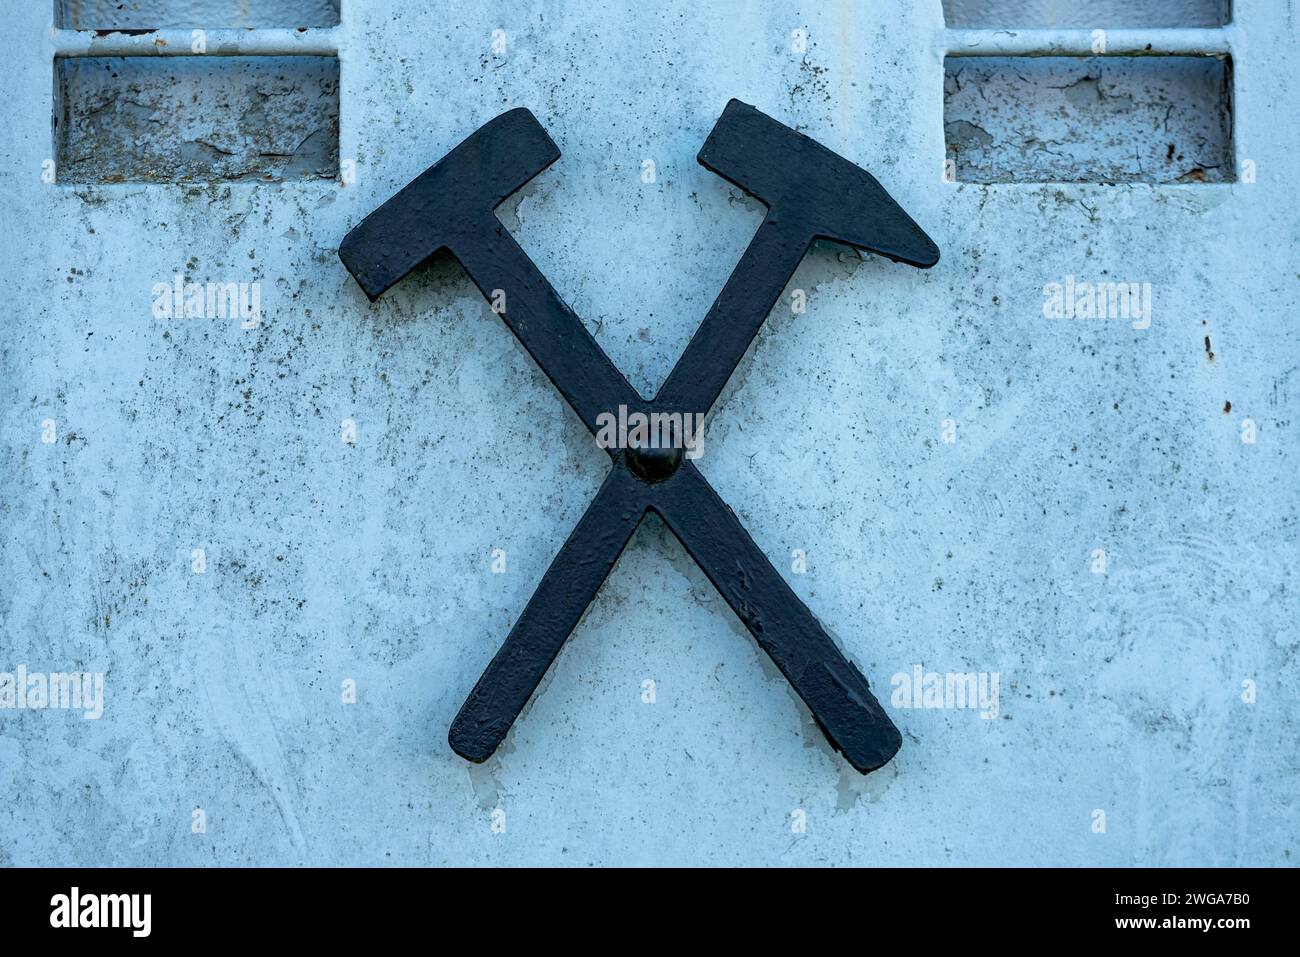 Mallet and chisel, mallet and iron, symbol of mining on a mine car, lorry for transporting lignite underground, open-air museum at Weckesheim Stock Photo